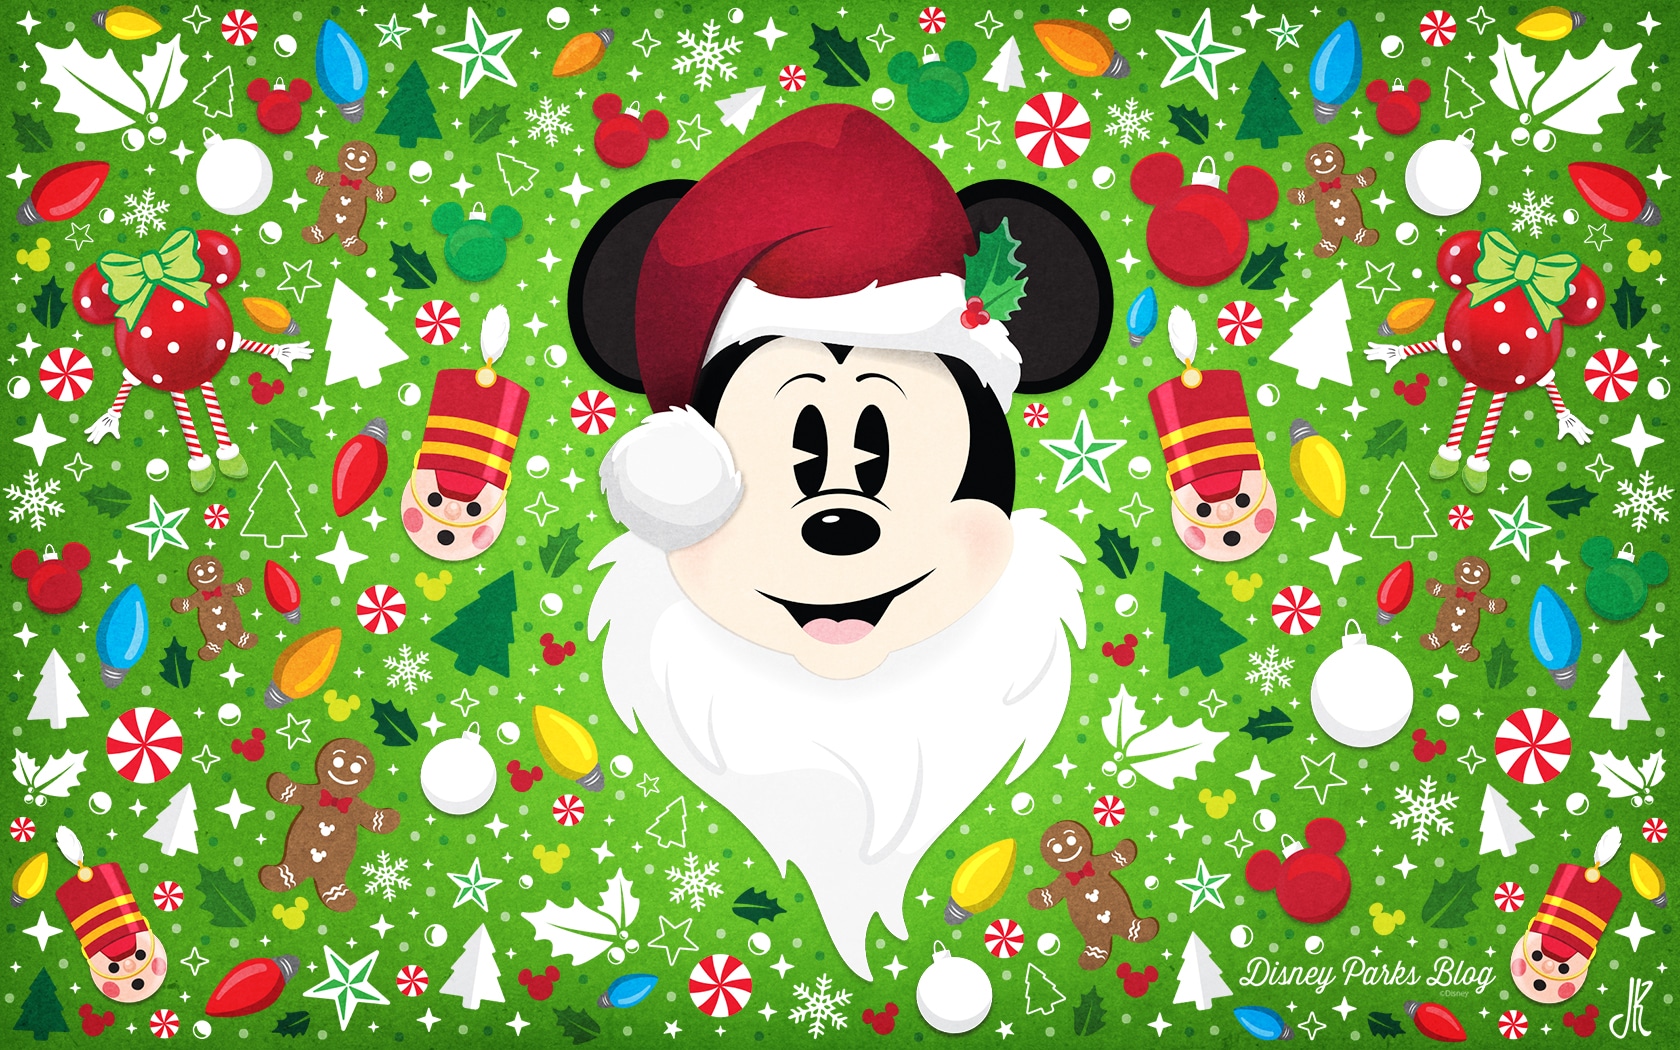 Get Excited For The Season With 18 Holiday Disney Parks Blog Wallpapers Disney Parks Blog